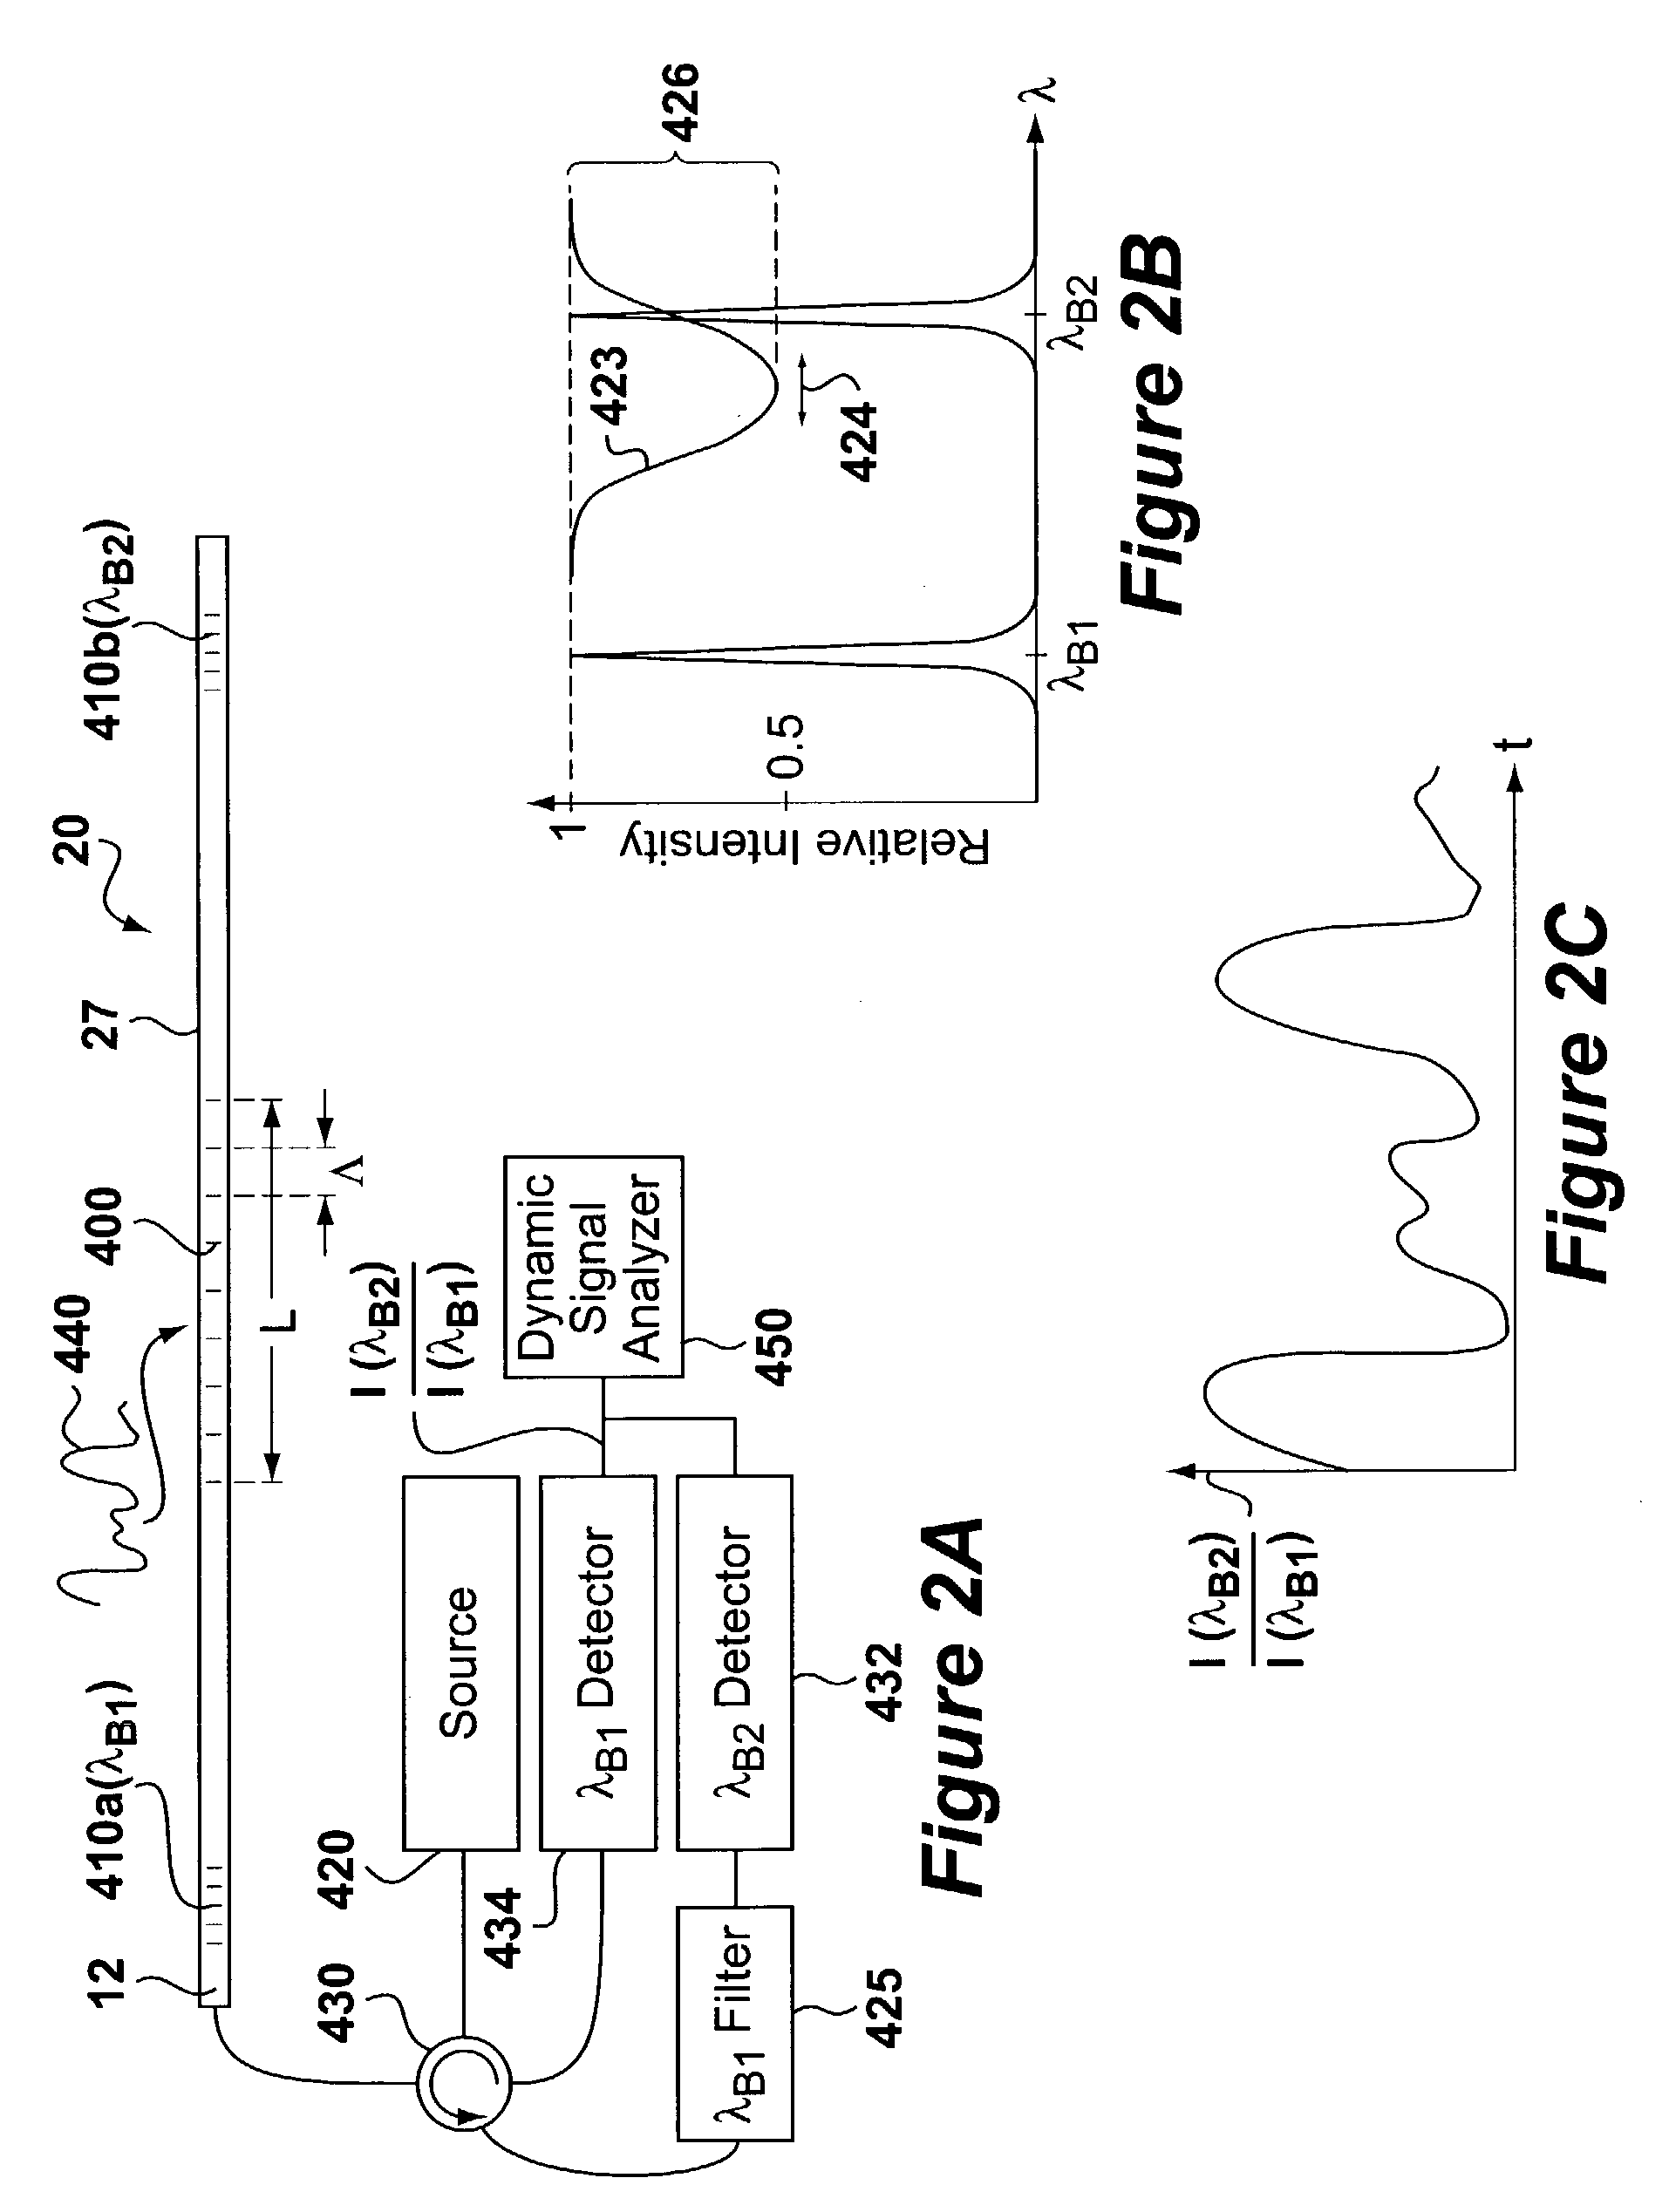 Optical sensor using a long period grating suitable for dynamic interrogation